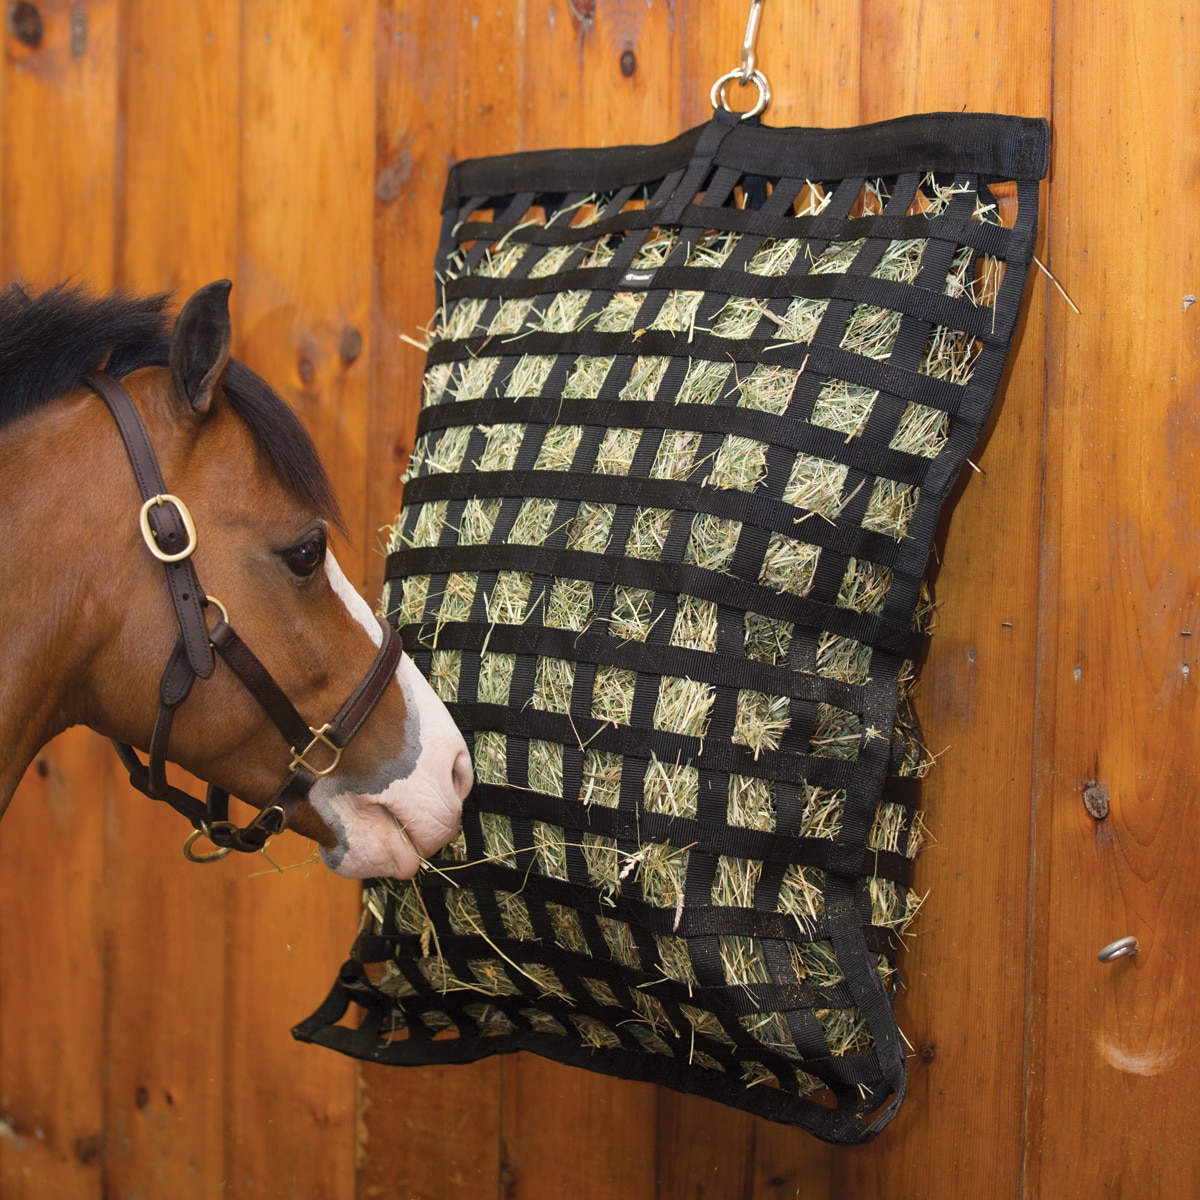 Reduces Horse Feeding Anxiety and Behavioral Issues ANQIA Full Day Slow Feed Hay Net Bag,1.2 Hole Mesh Net Horse Feeder Bag 